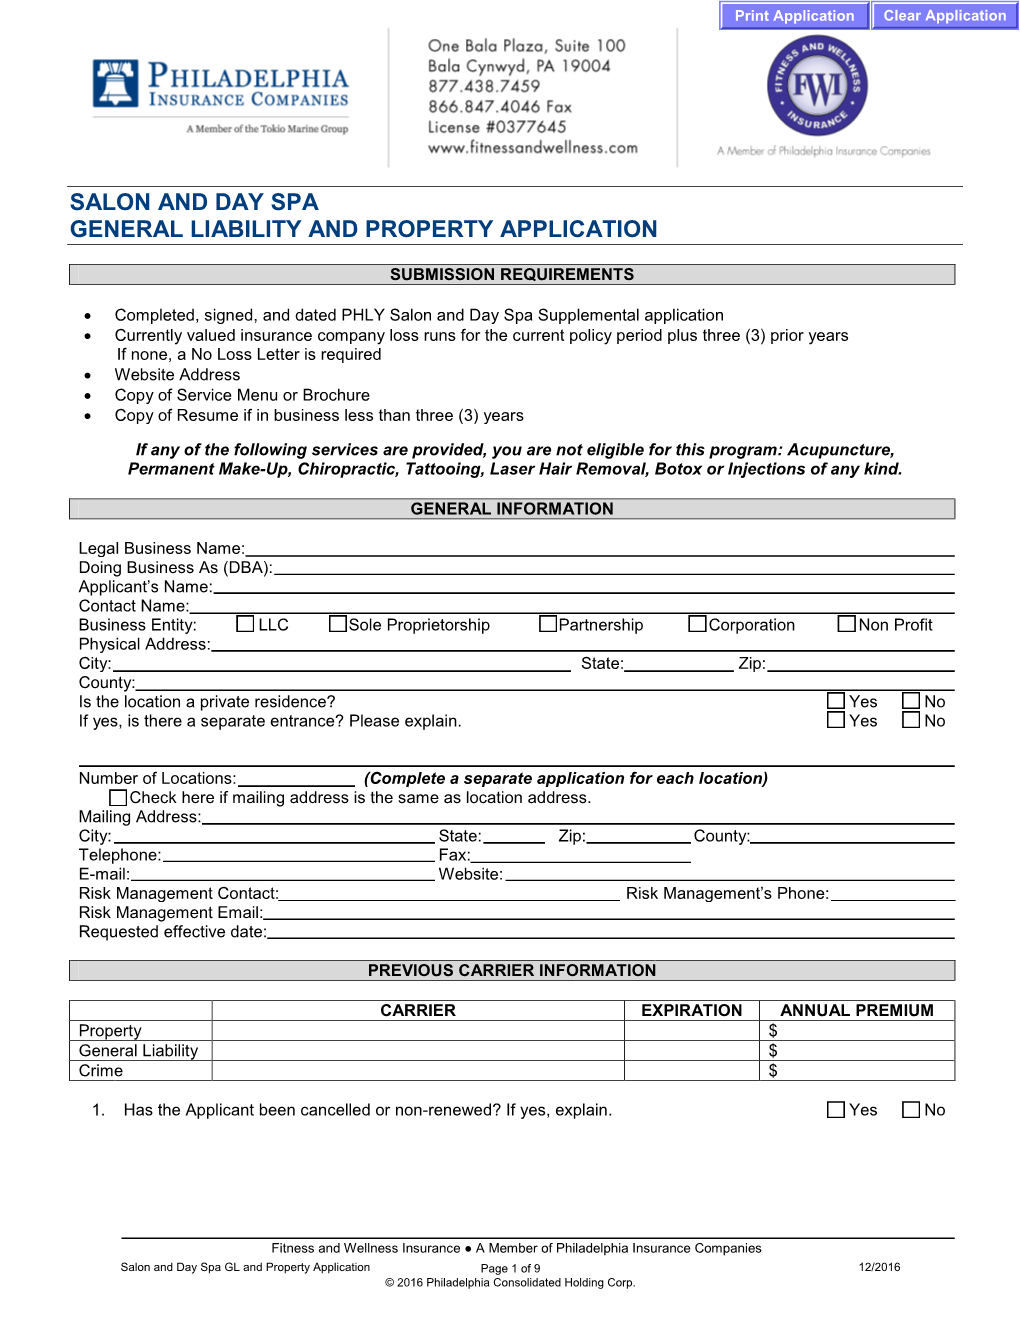 Salon and Day Spa General Liability and Property Application